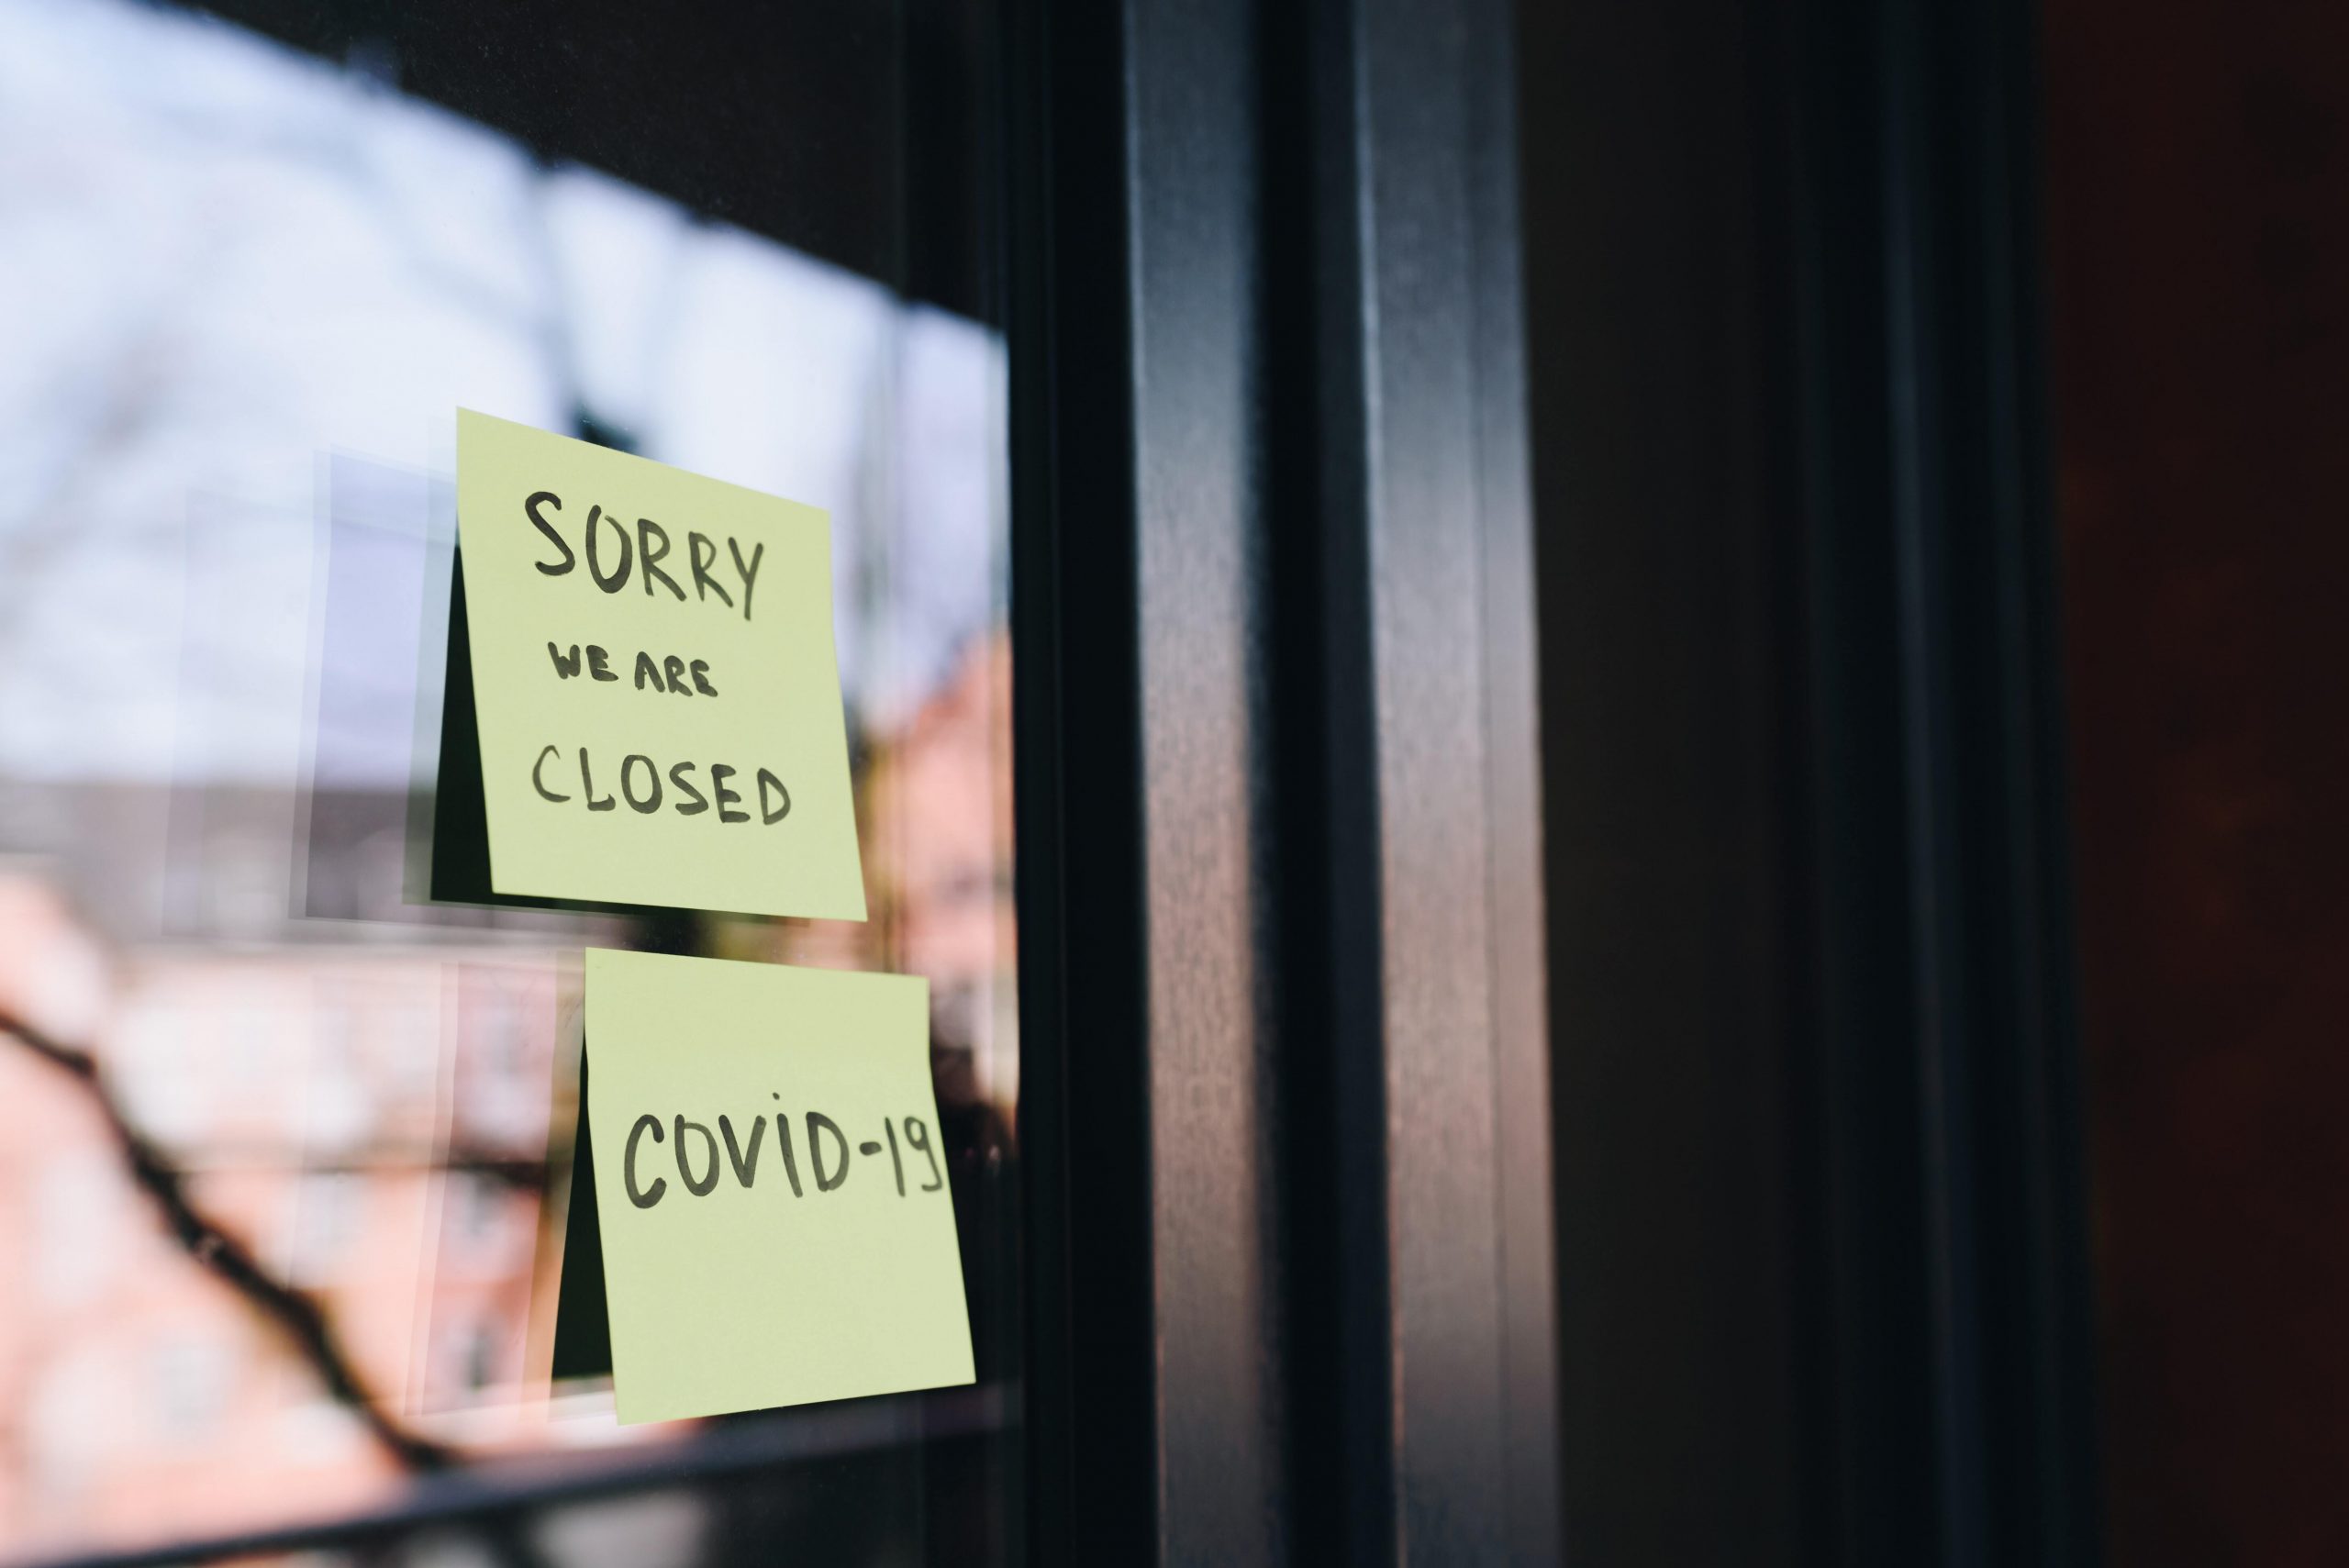 A handwritten post-it note on the window of a business reads "Sorry we are closed. COVID-19."